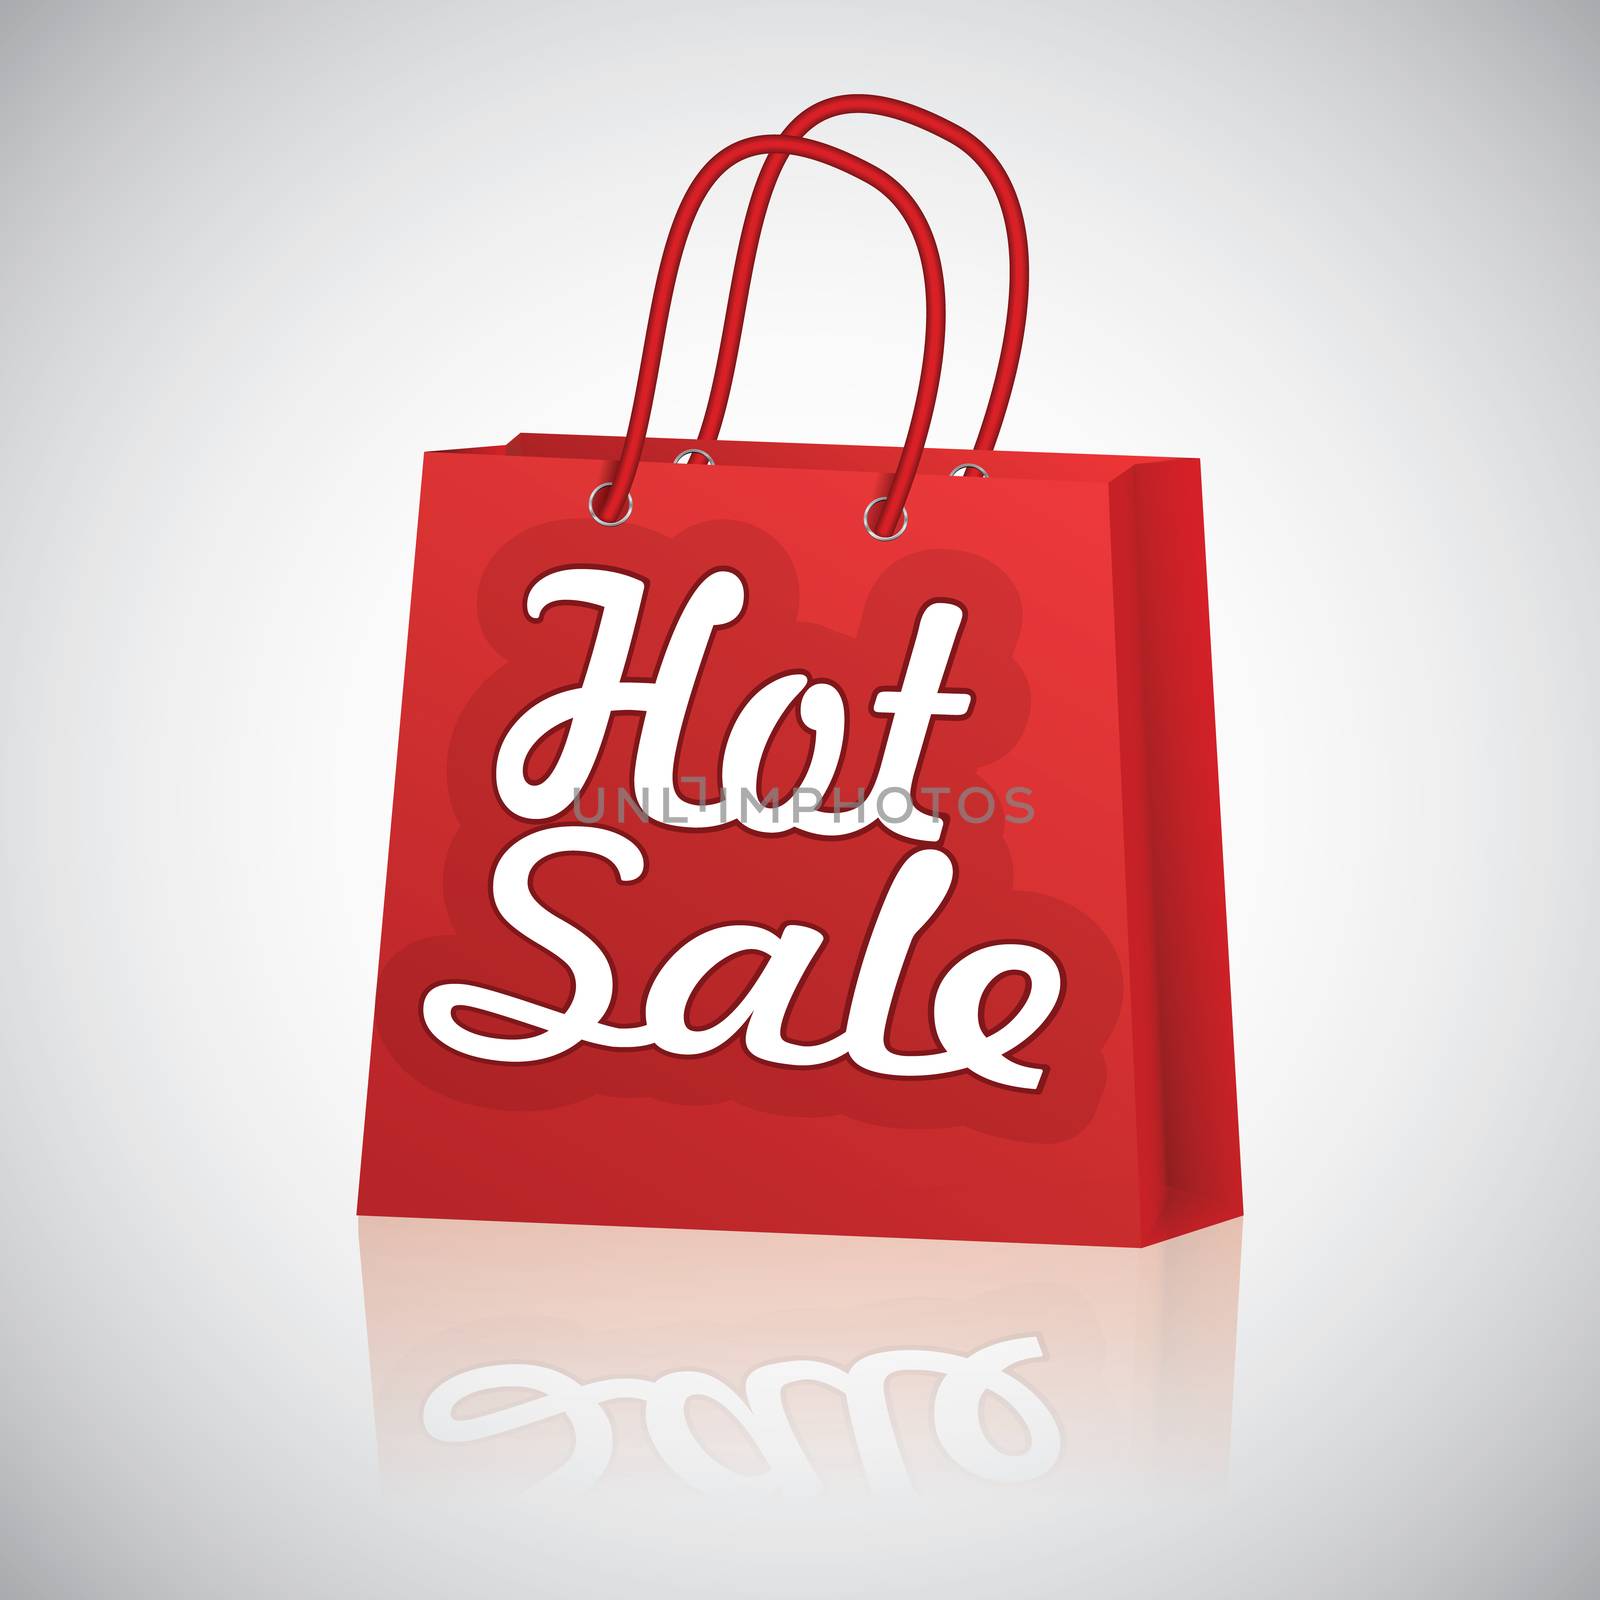 Realistic red shopping bag rope handles, text hot sale with raflaction on grey glossy background.